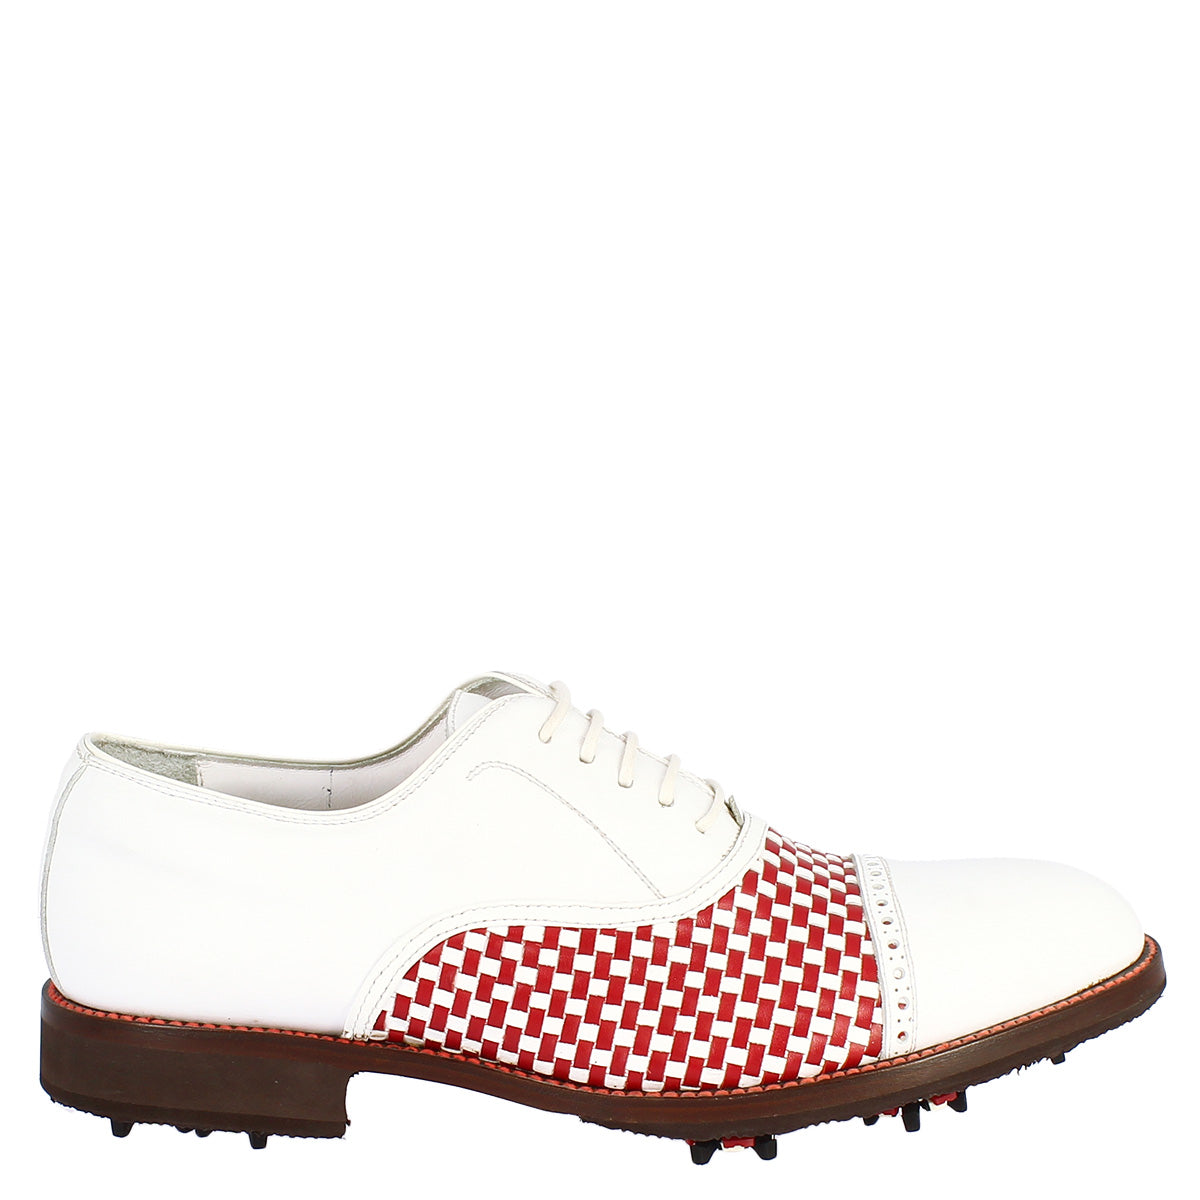 Classic handmade women's golf shoes in white red calf leather